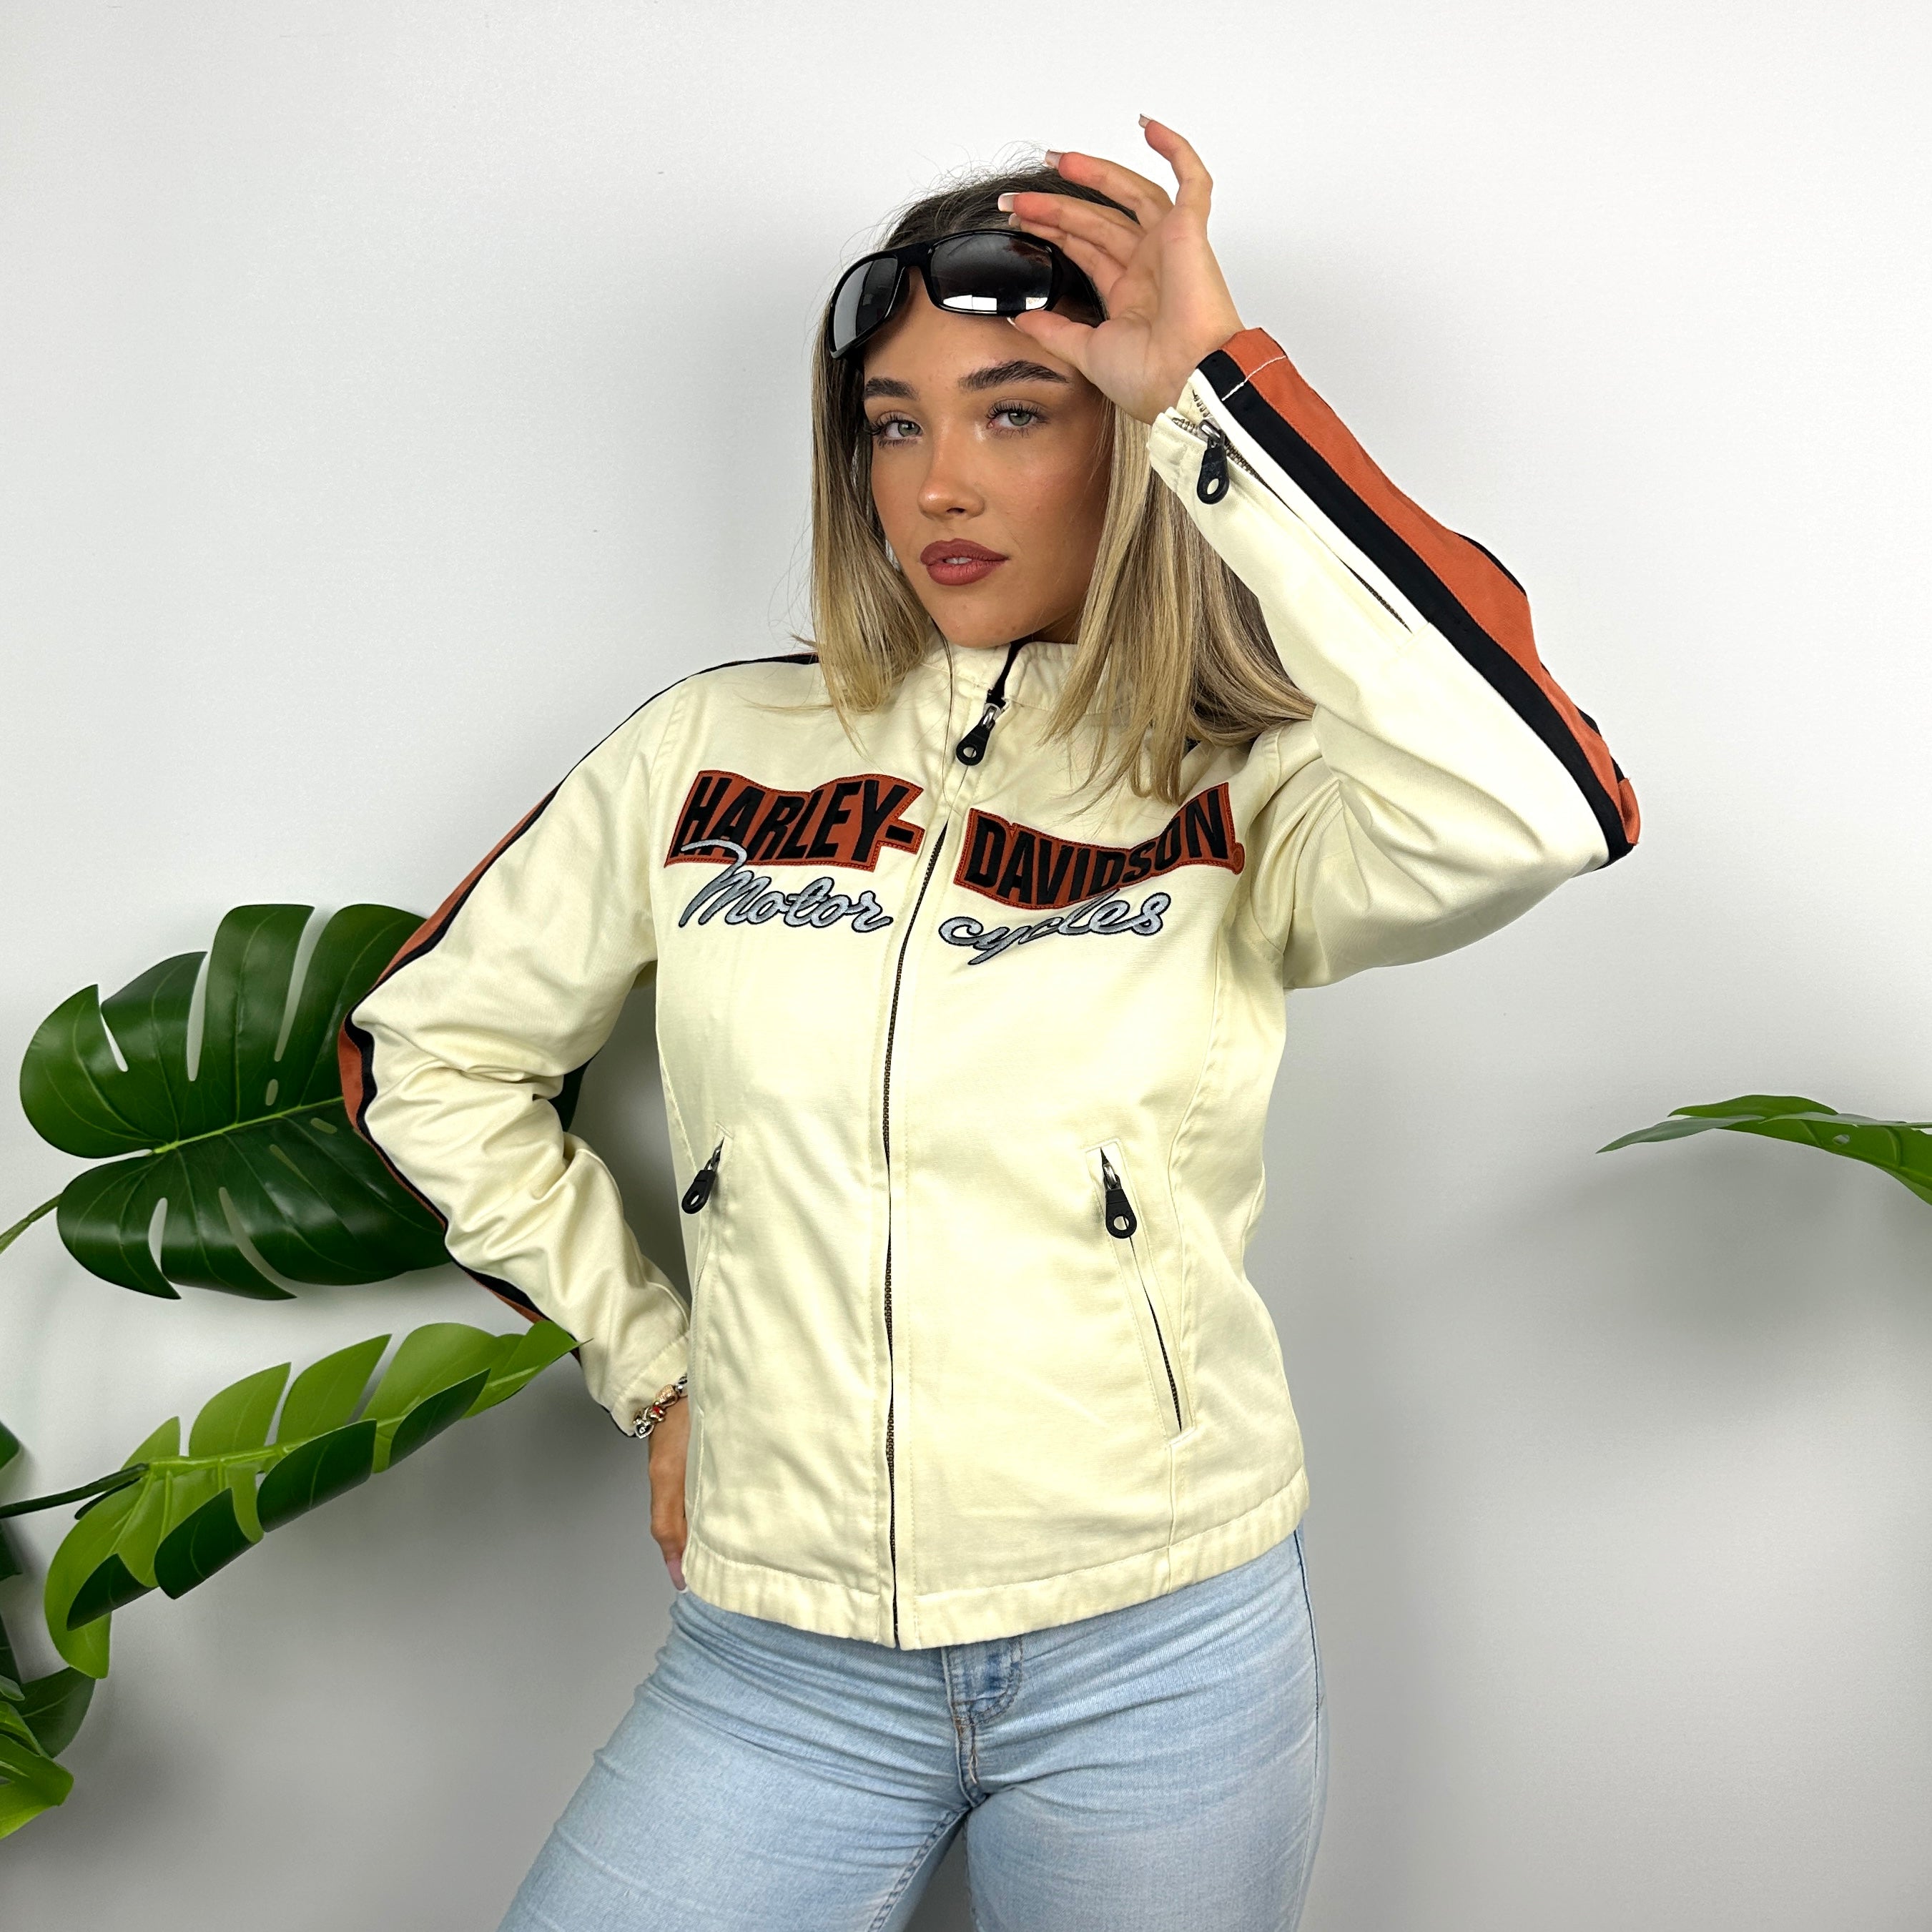 Harley Davidson Cream Embroidered Spell Out Jacket (S)